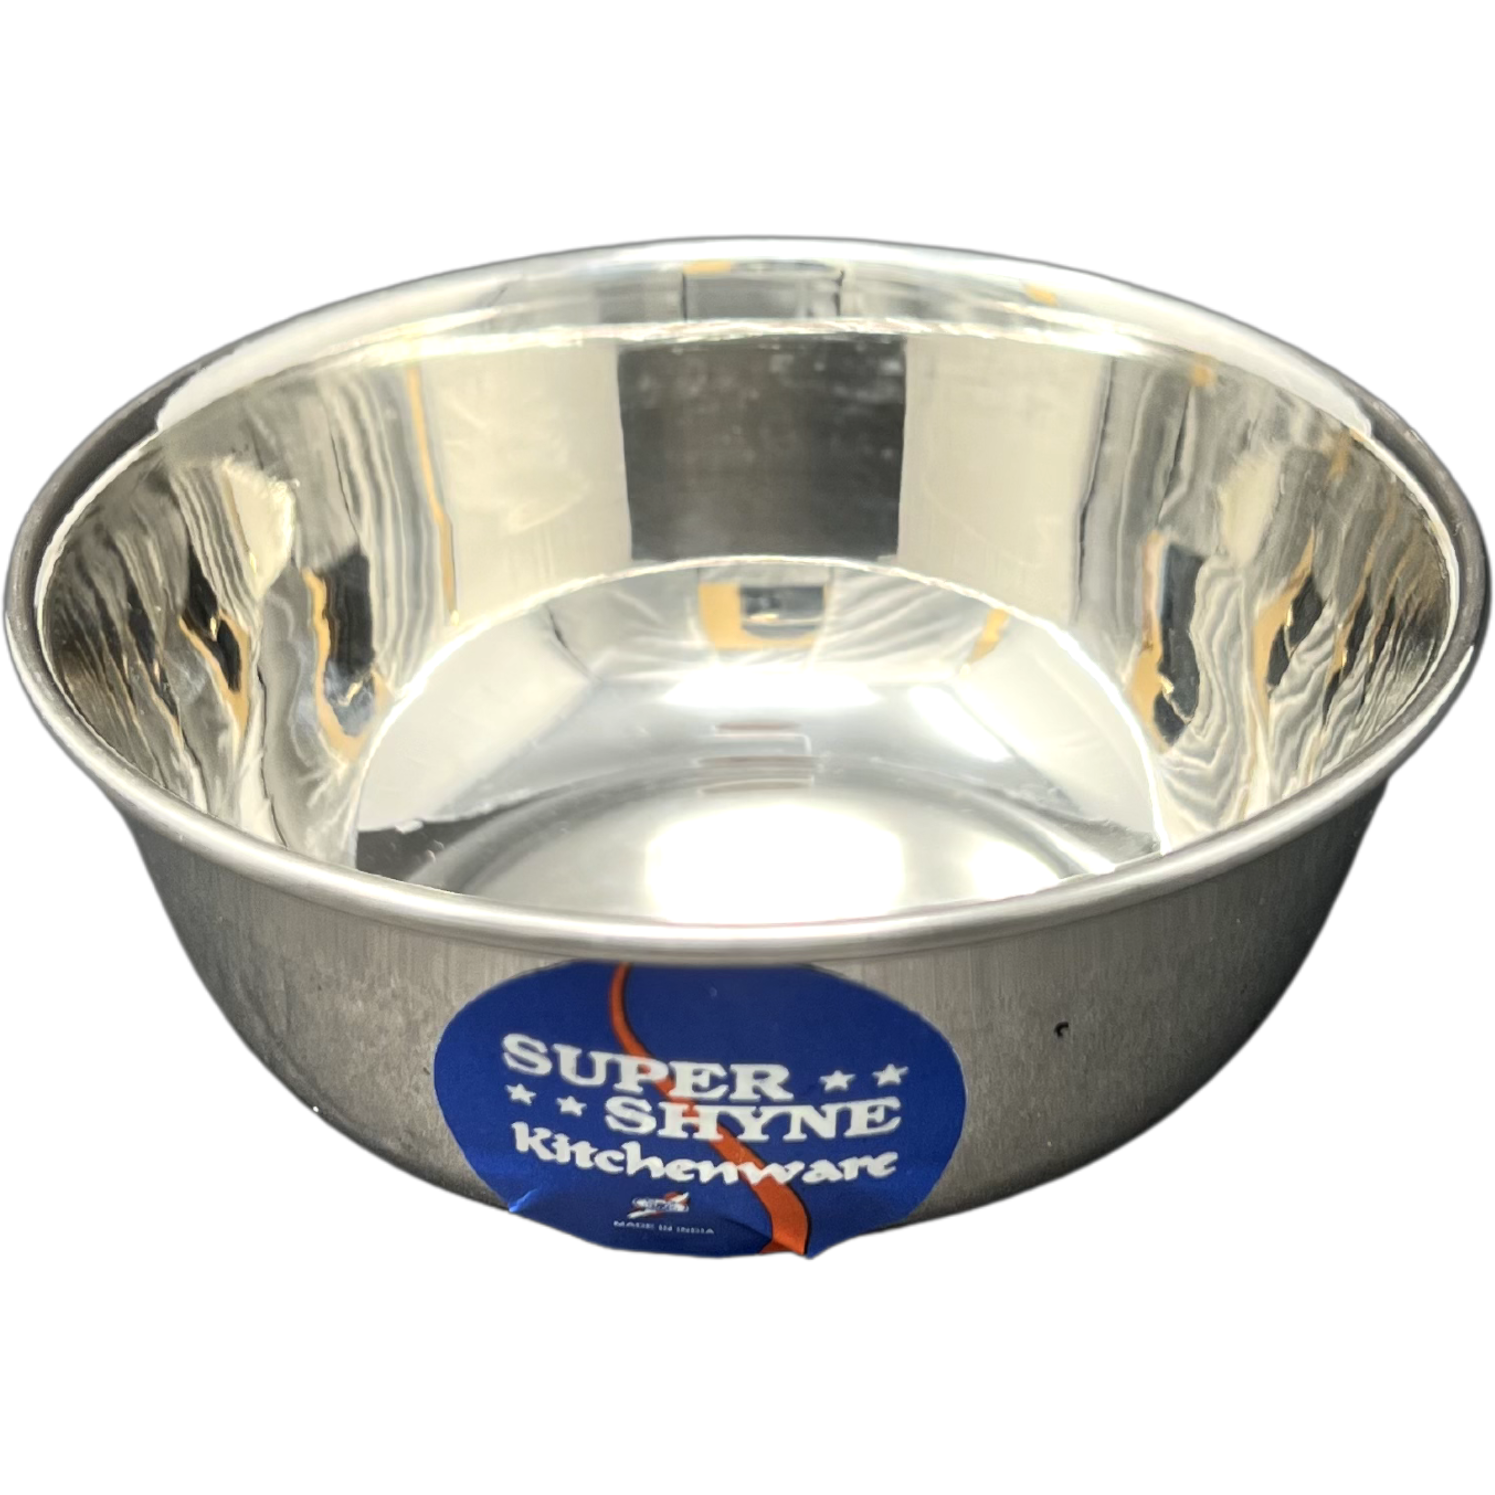 Case of 12 - Super Shyne Stainless Steel Wide Mouth Bowl - 4.25 Inch